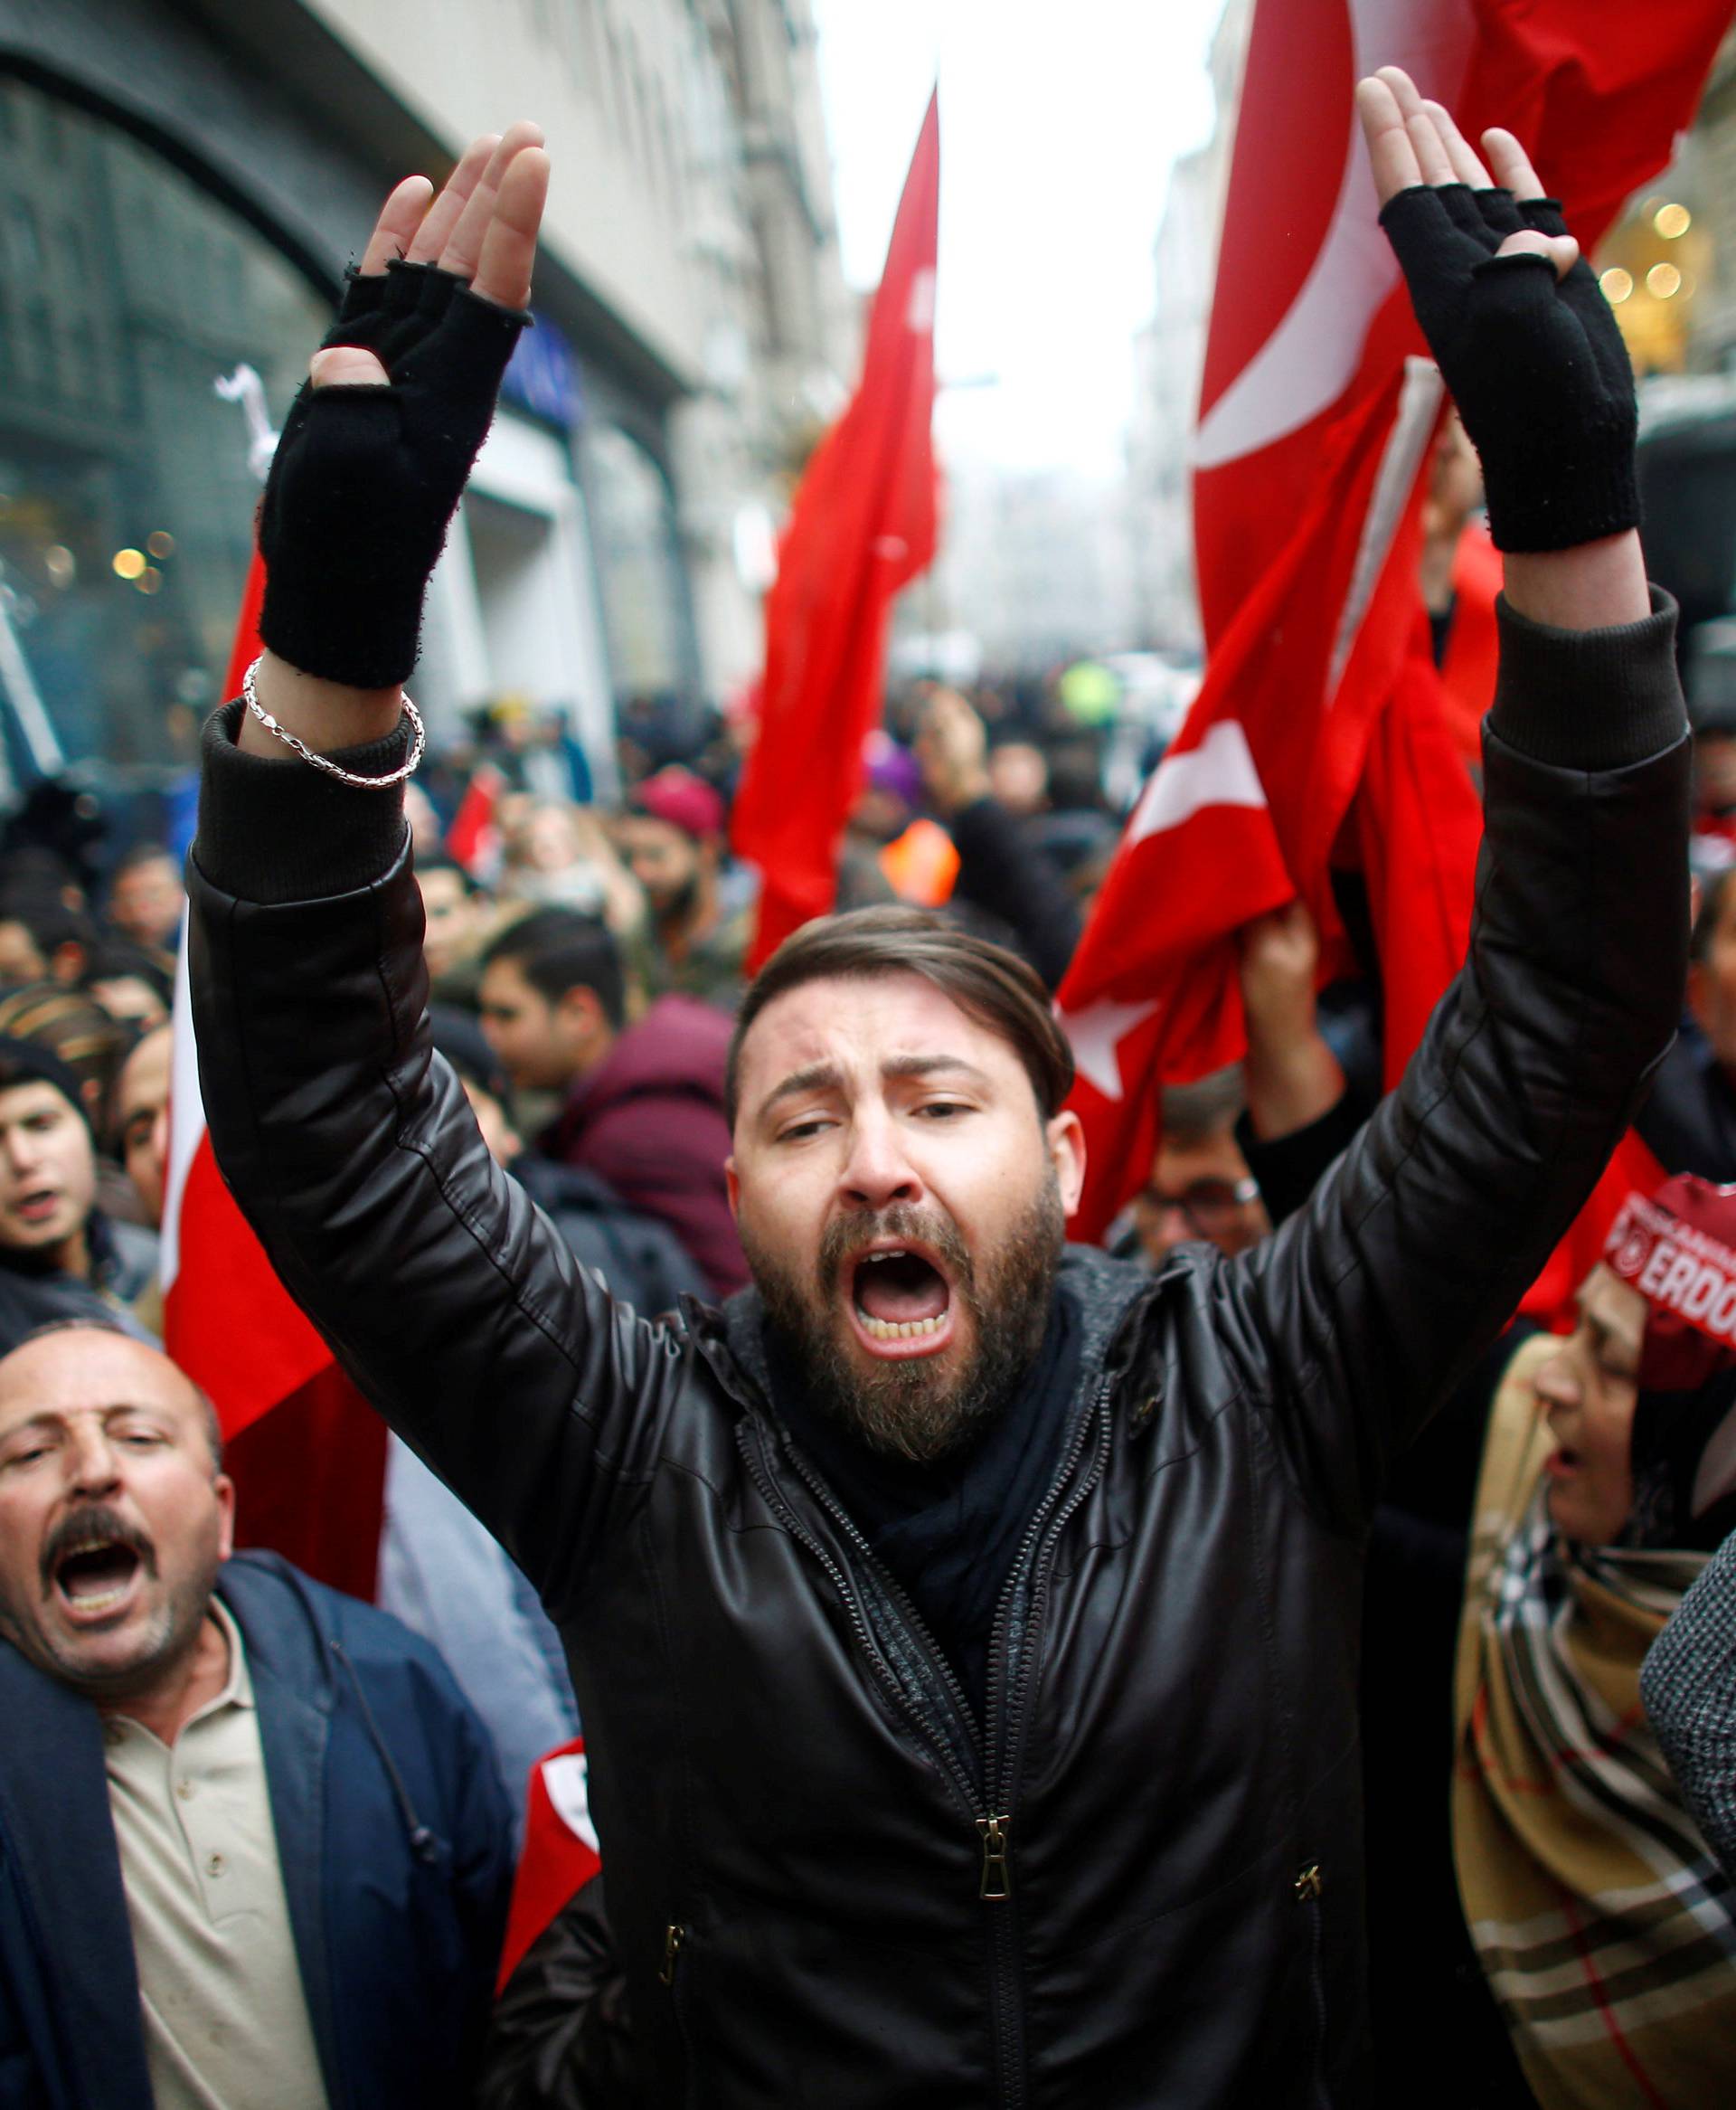 People shout slogans during a protest in front of the Dutch Consulate in Istanbul